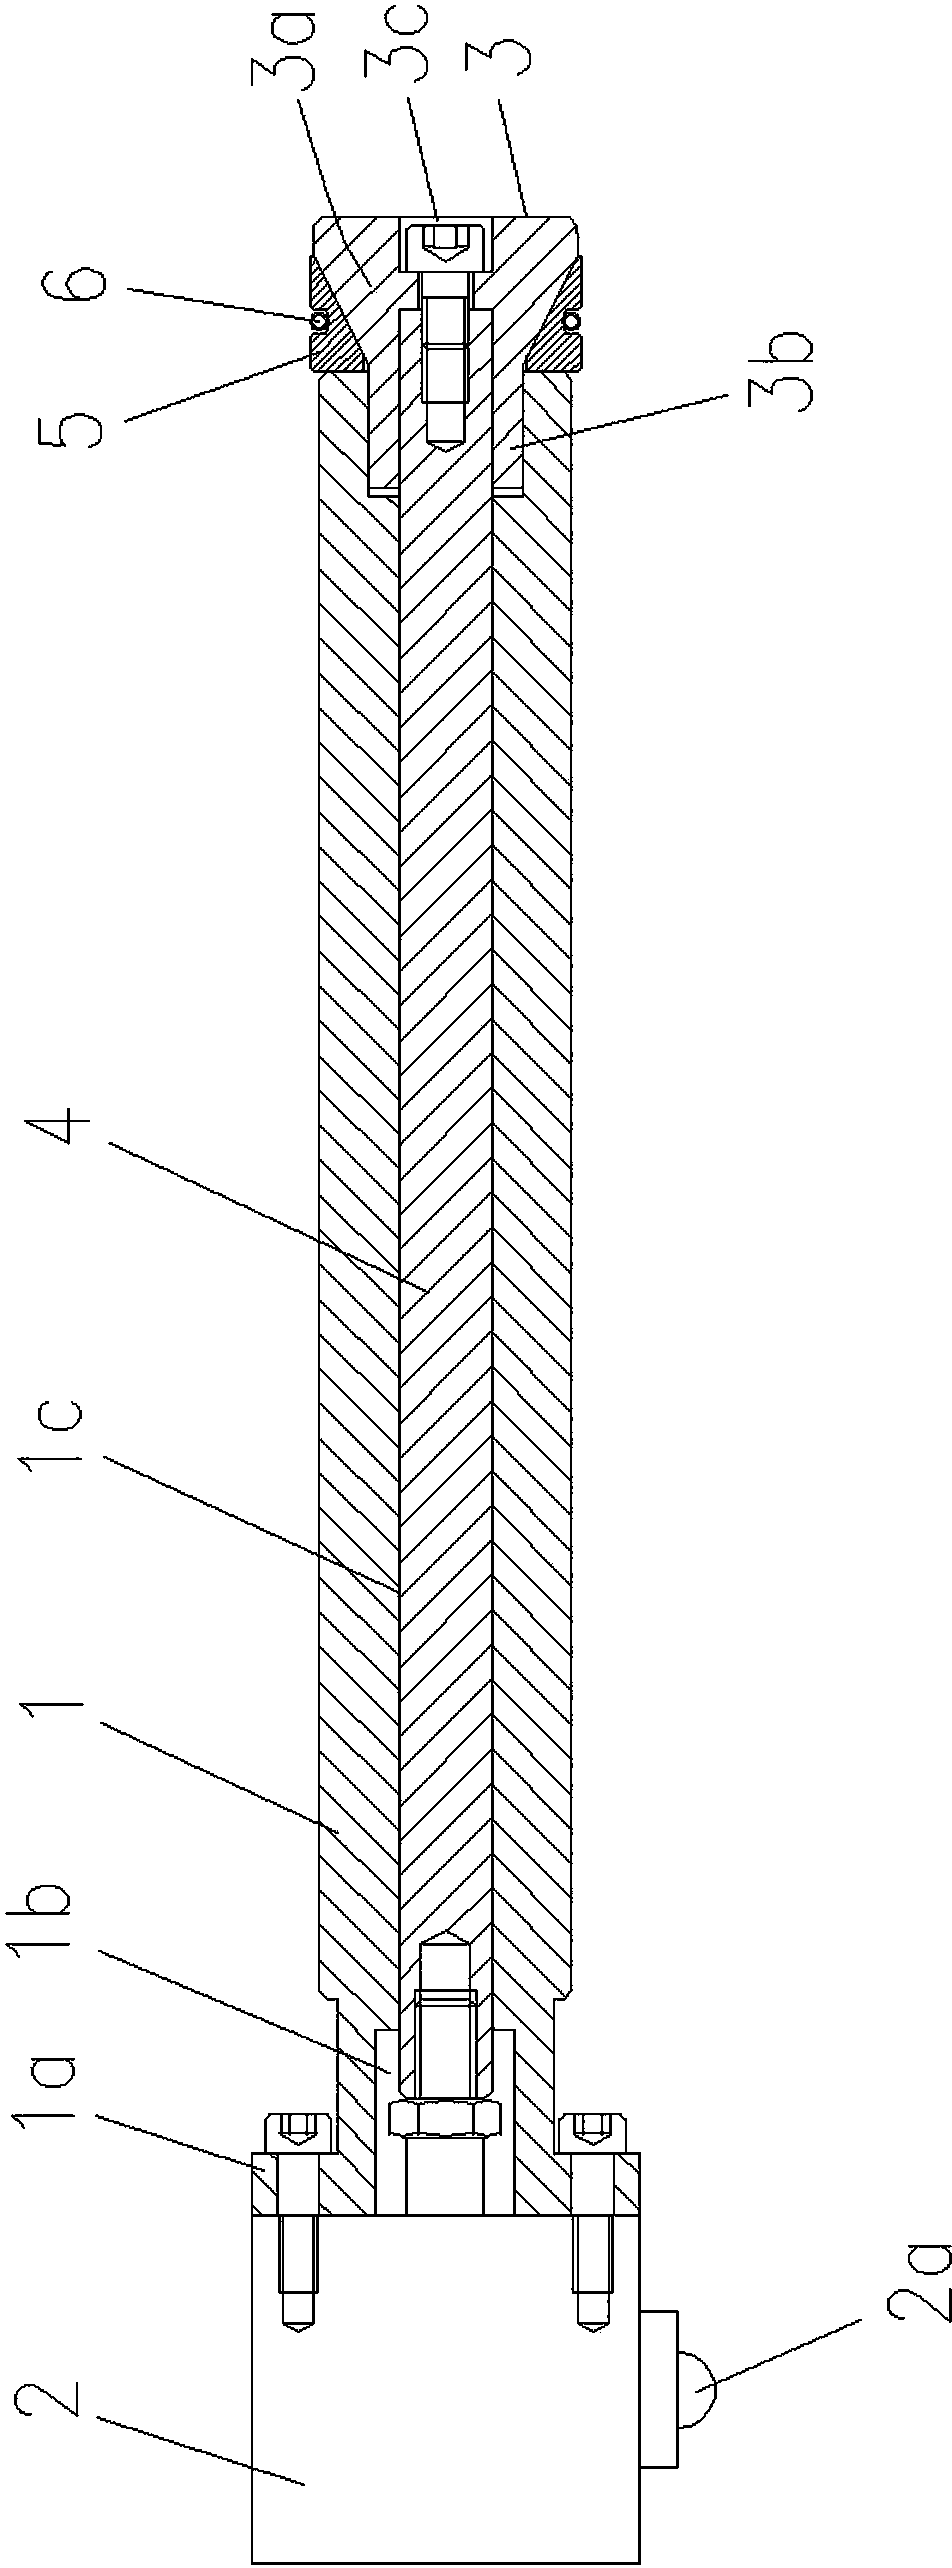 Bearing picking and placing device